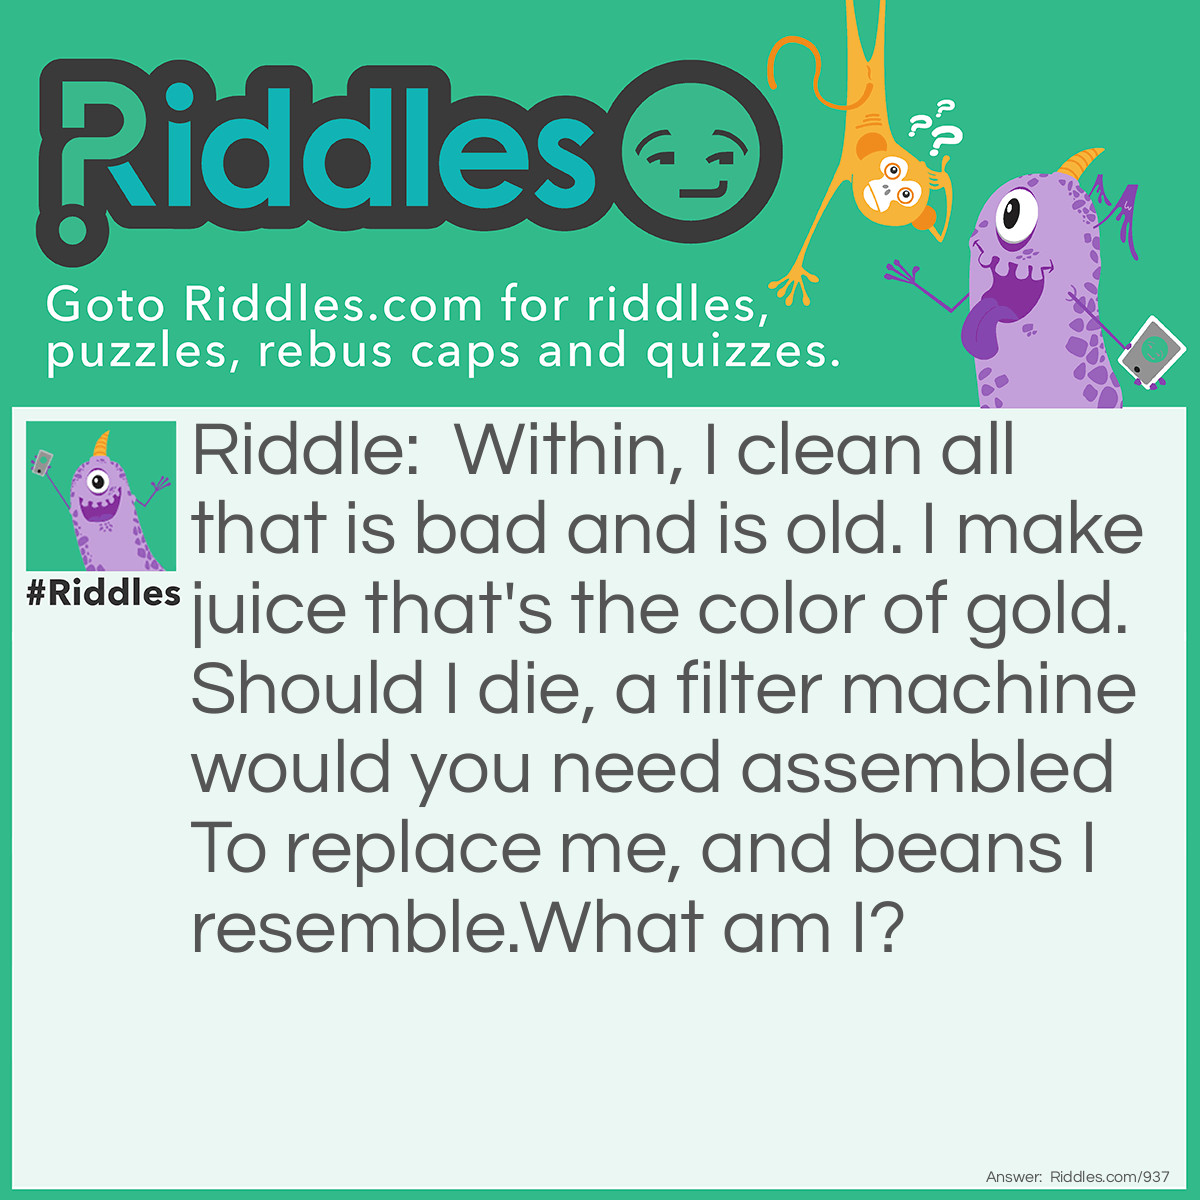 Riddle: Within, I clean all that is bad and old. I make juice that's the color of gold. Should I die, a filter machine would you need to assemble to replace me, and a bean I resemble... What am I? Answer: A kidney.